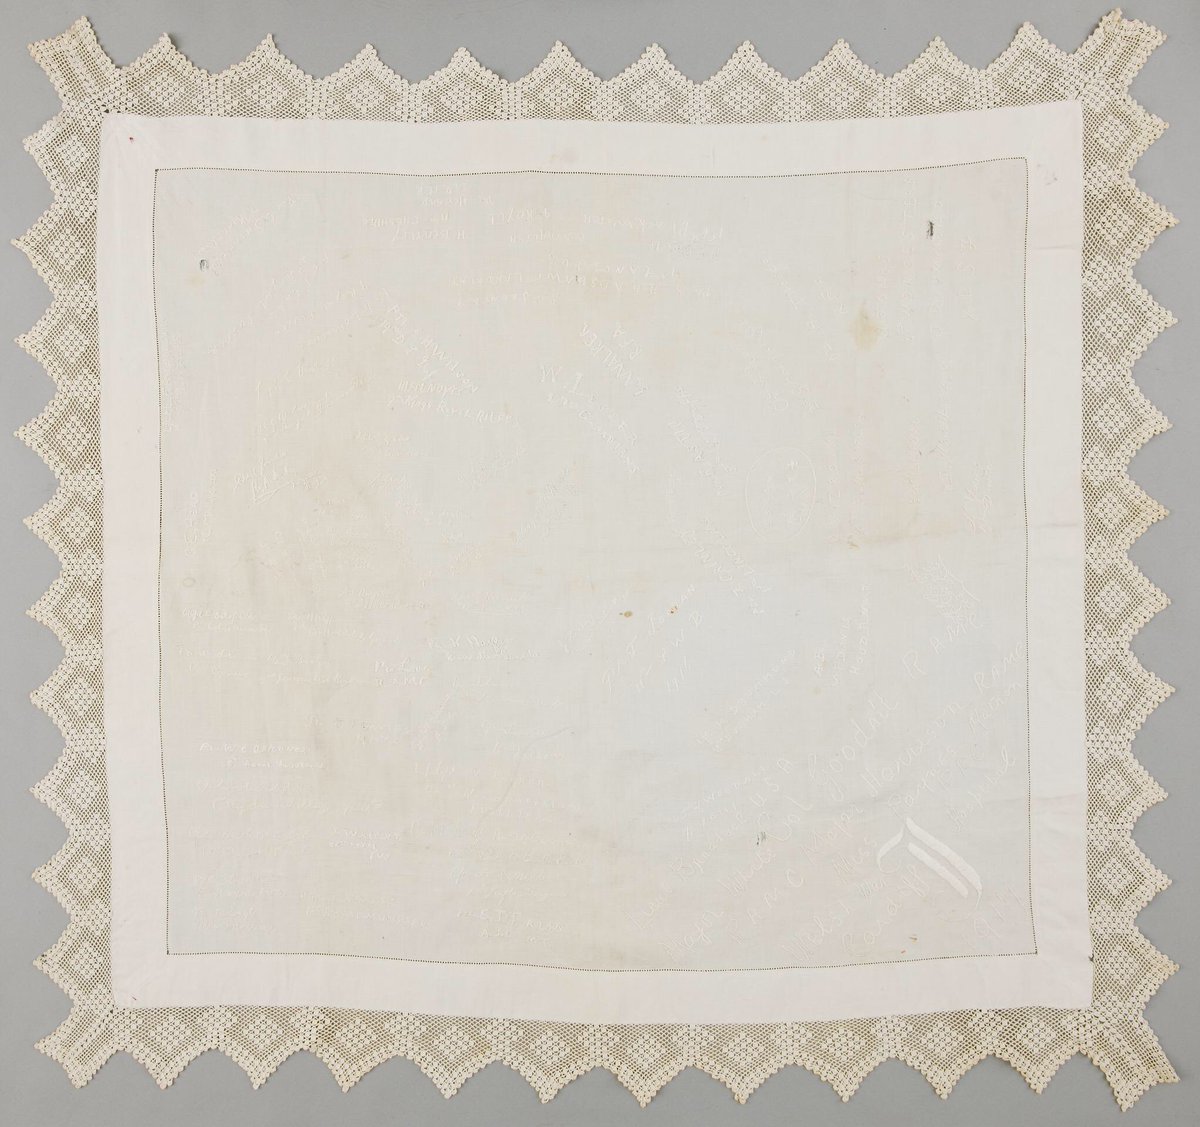 Look closely at the tablecloth and you'll see names embroidered in white thread across the entire surface.These are the signatures of a group of patients and staff at the Welsh Metropolitan War Hospital, Whitchurch, Cardiff in 1917. https://museum.wales/collections/online/object/56dbebdb-6fcd-3189-a50d-1f11d5e70f65/Table-cloth/?field0=with_images&value0=1&field1=string&value1=Whitchurch&field2=string&value2=Hospital&index=1